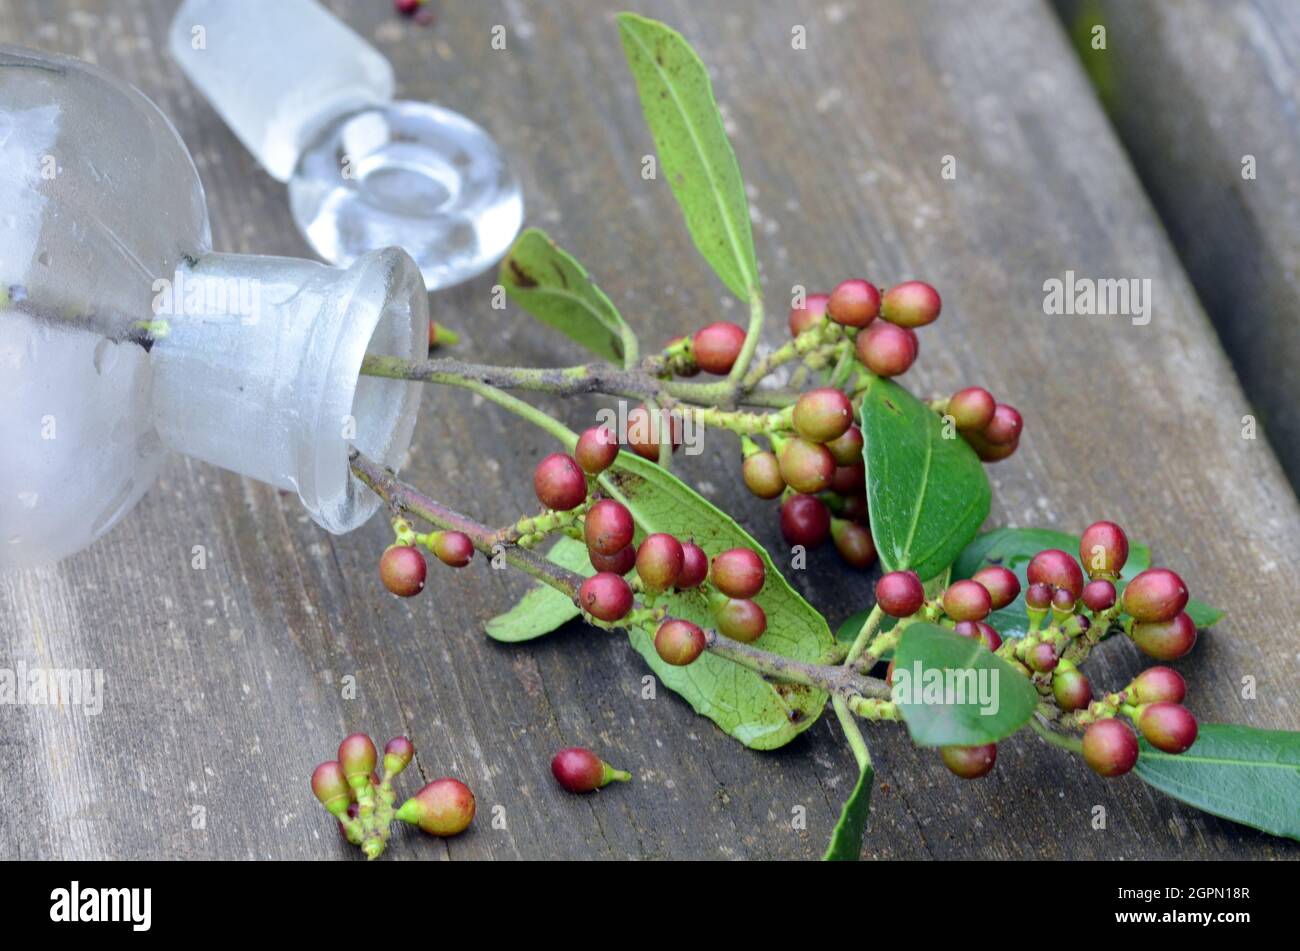 Medicinal plants. Branch of Rhamnus alaternus with fruits in a glass jar on a wooden table Stock Photo